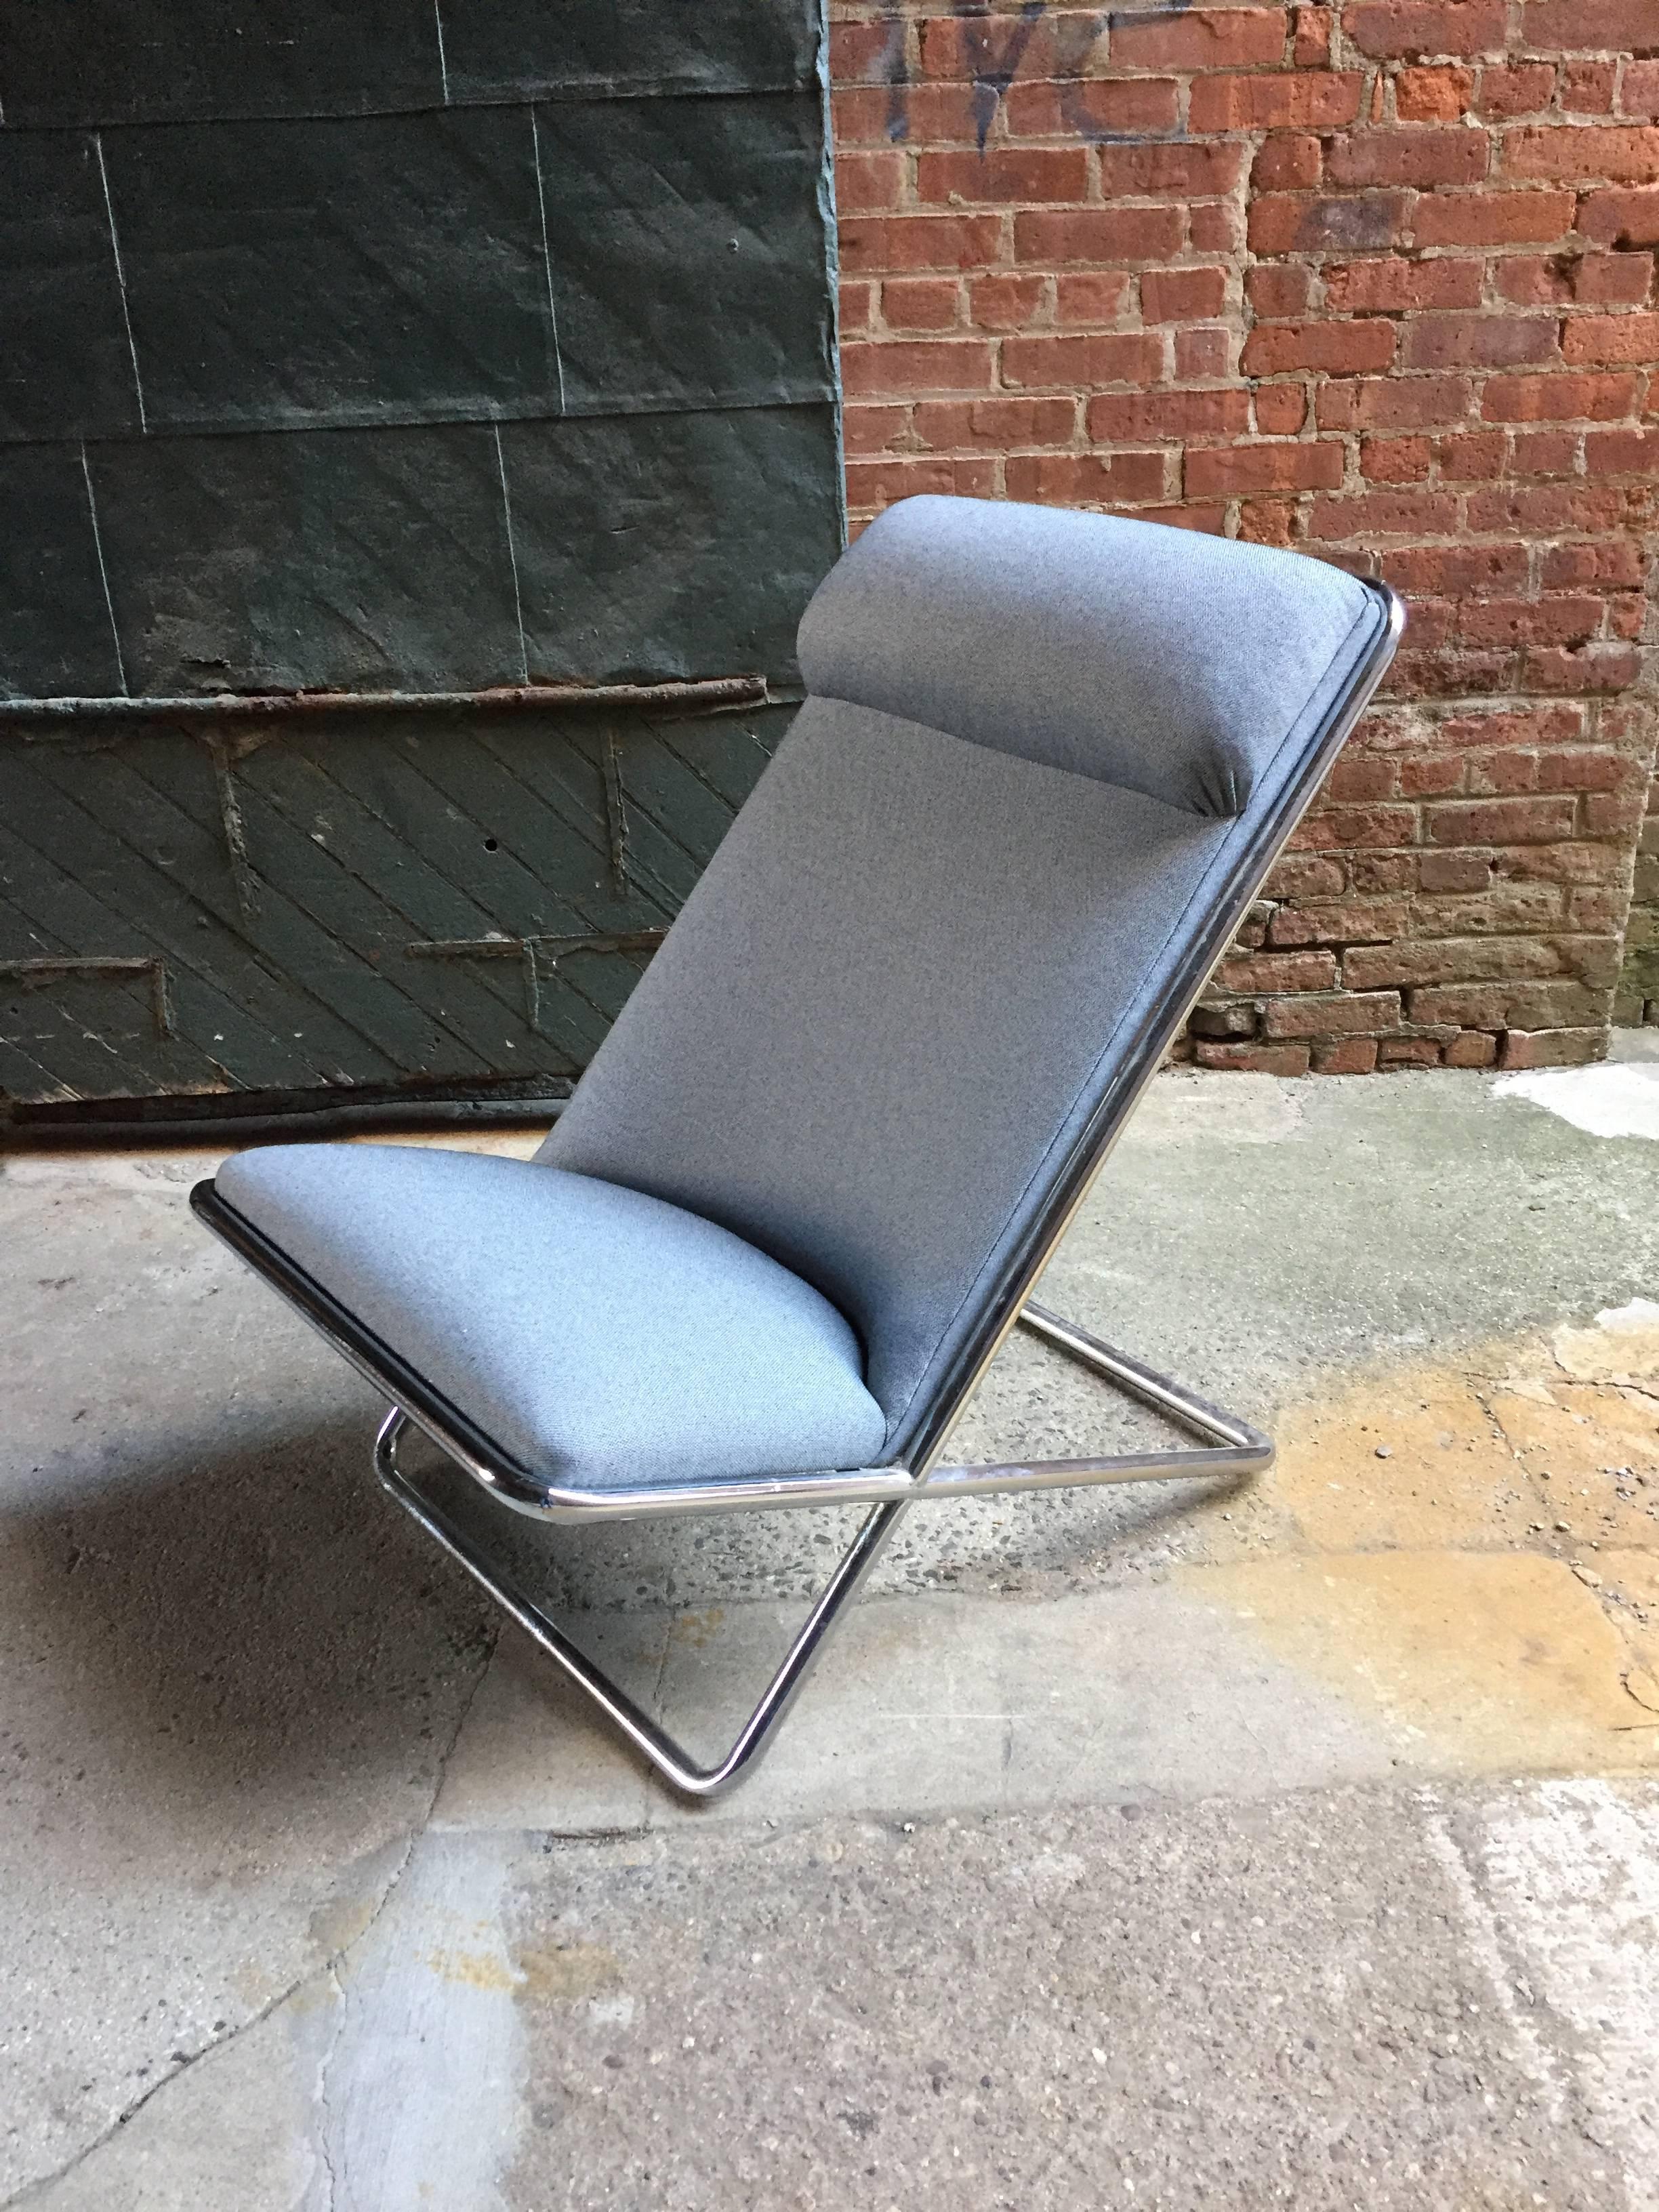 Ward Bennett design for Brickel Associates, circa 1970. Tubular chrome frame supports a newly upholstered light gray Knoll fabric seat cushion. Low profile design.

Measures: 35